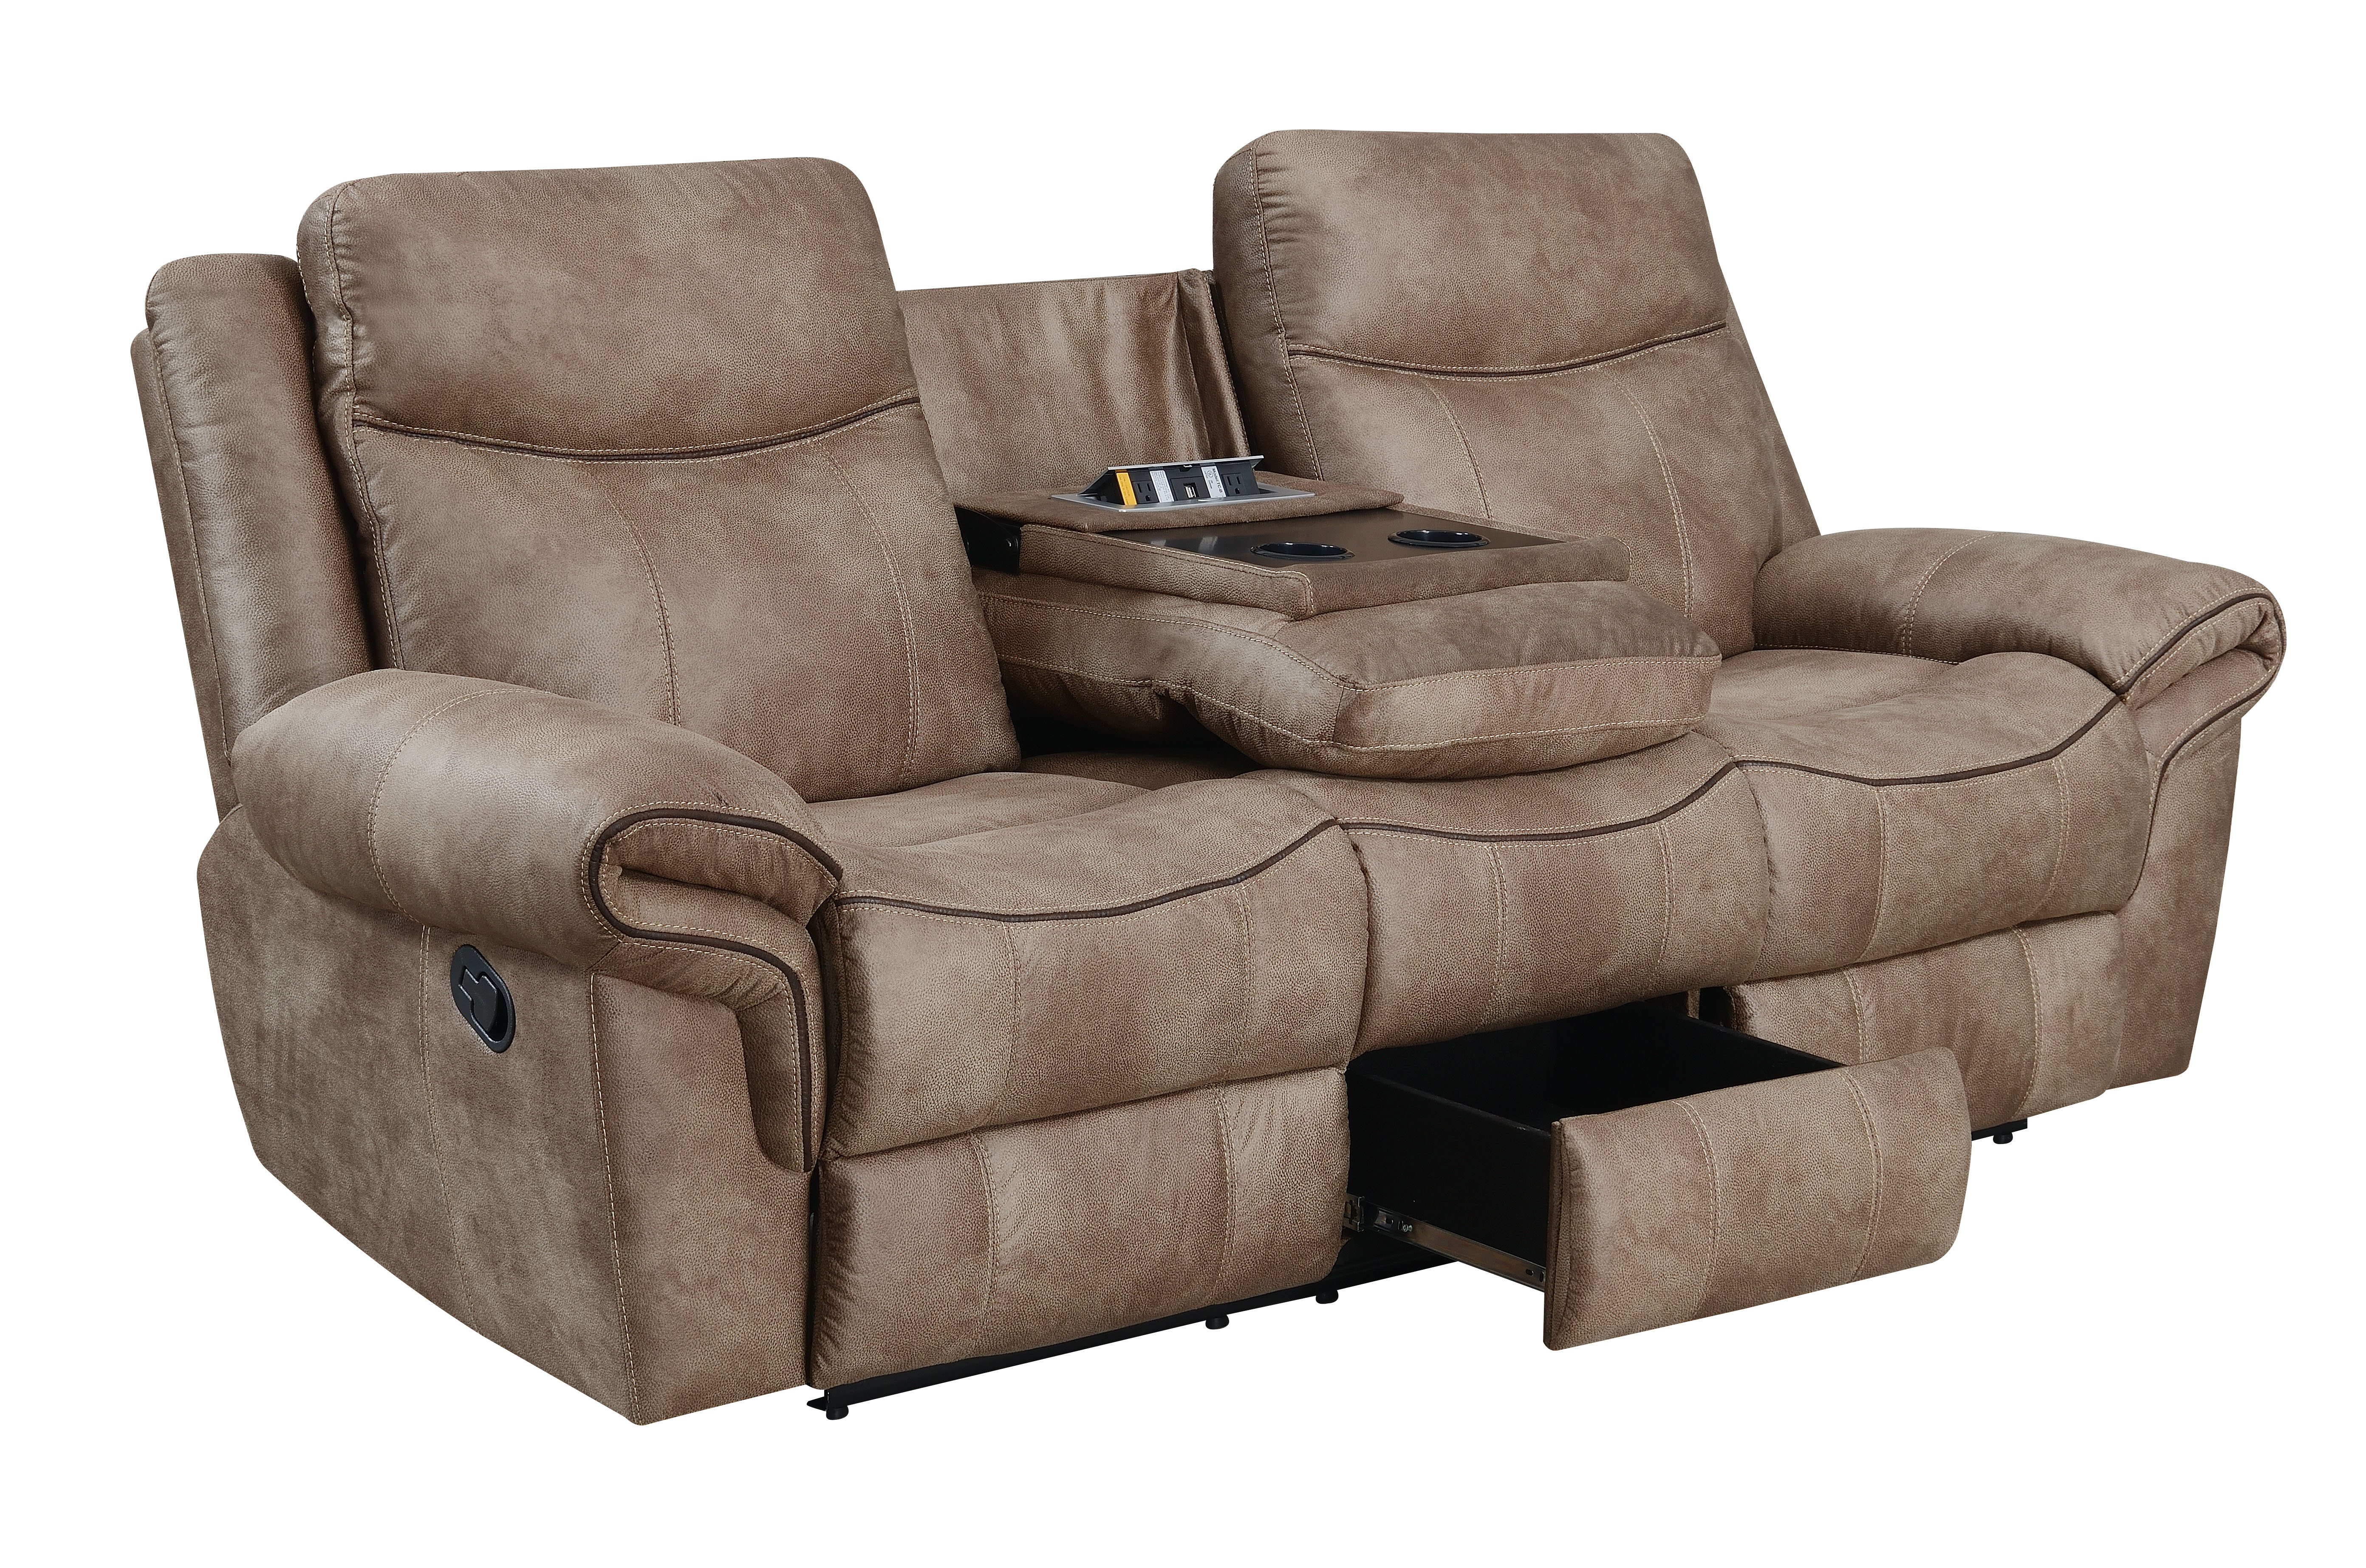 Steve Silver Nh850s Nashville Cocoa Reclining Sofa With Drop Down Table